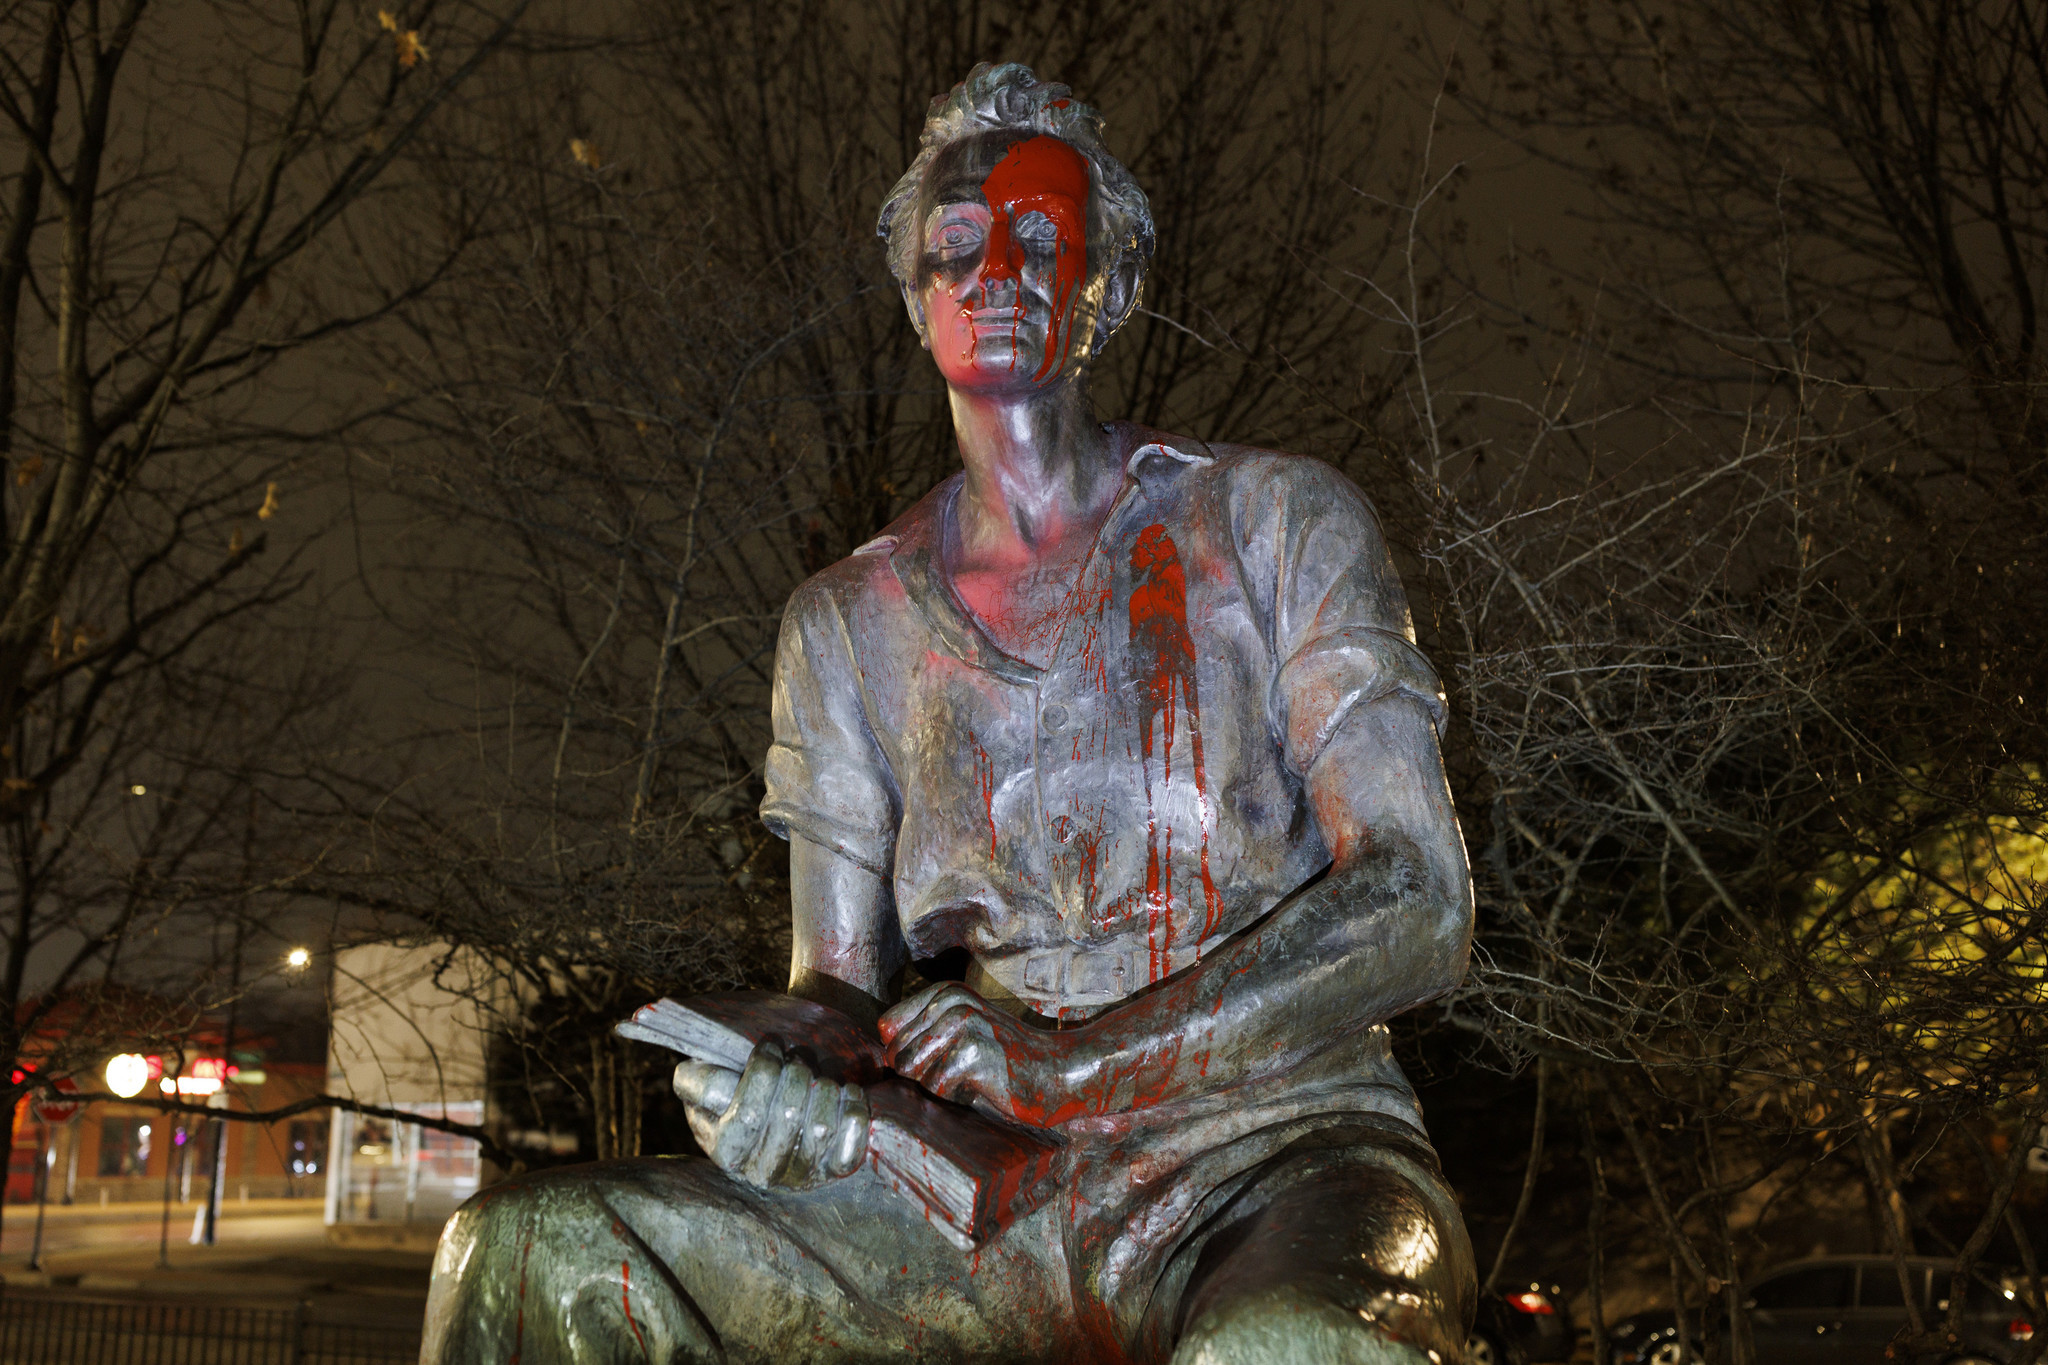 Statue of Young Abraham Lincoln is vandalized with red paint on